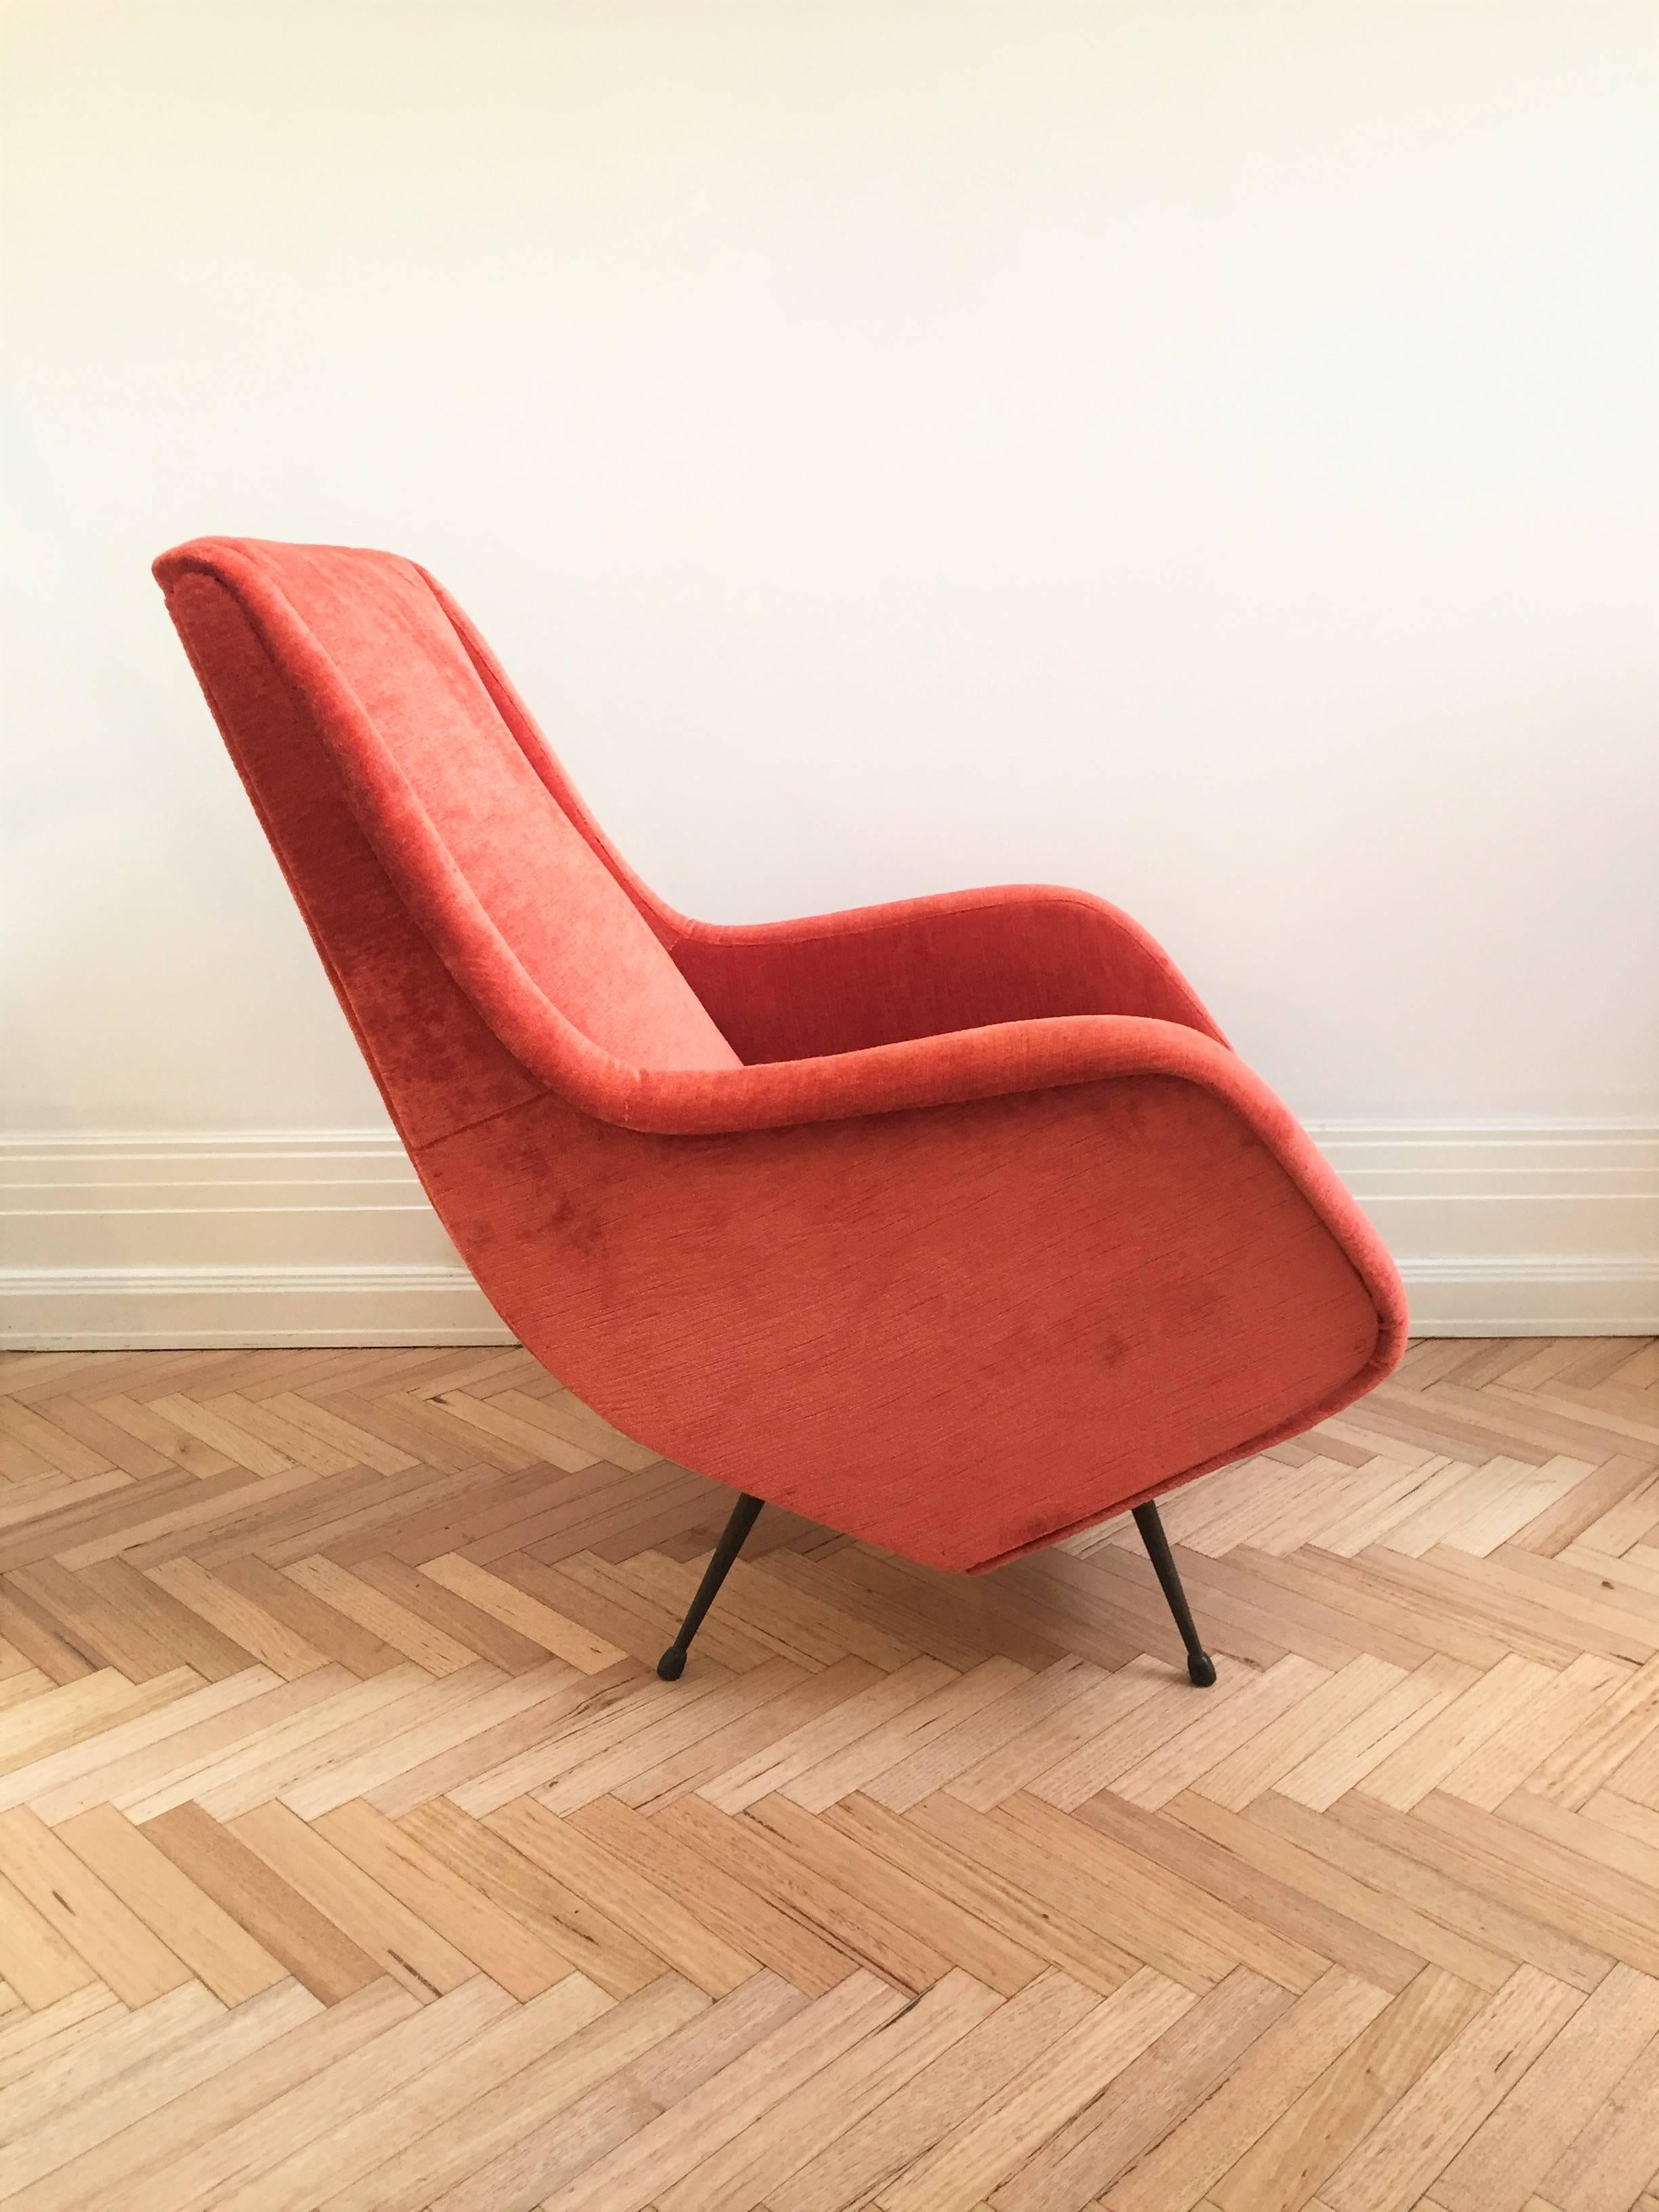 A pair of exquisite Lounge Chairs by Aldo Morbelli for ISA.
Aldo Morbelli (1903-1963) was a successful architect who worked in Torino,collaborating with Carlo Mollini on the construction of RAI Auditorium.
In 1937 he won a competition for the